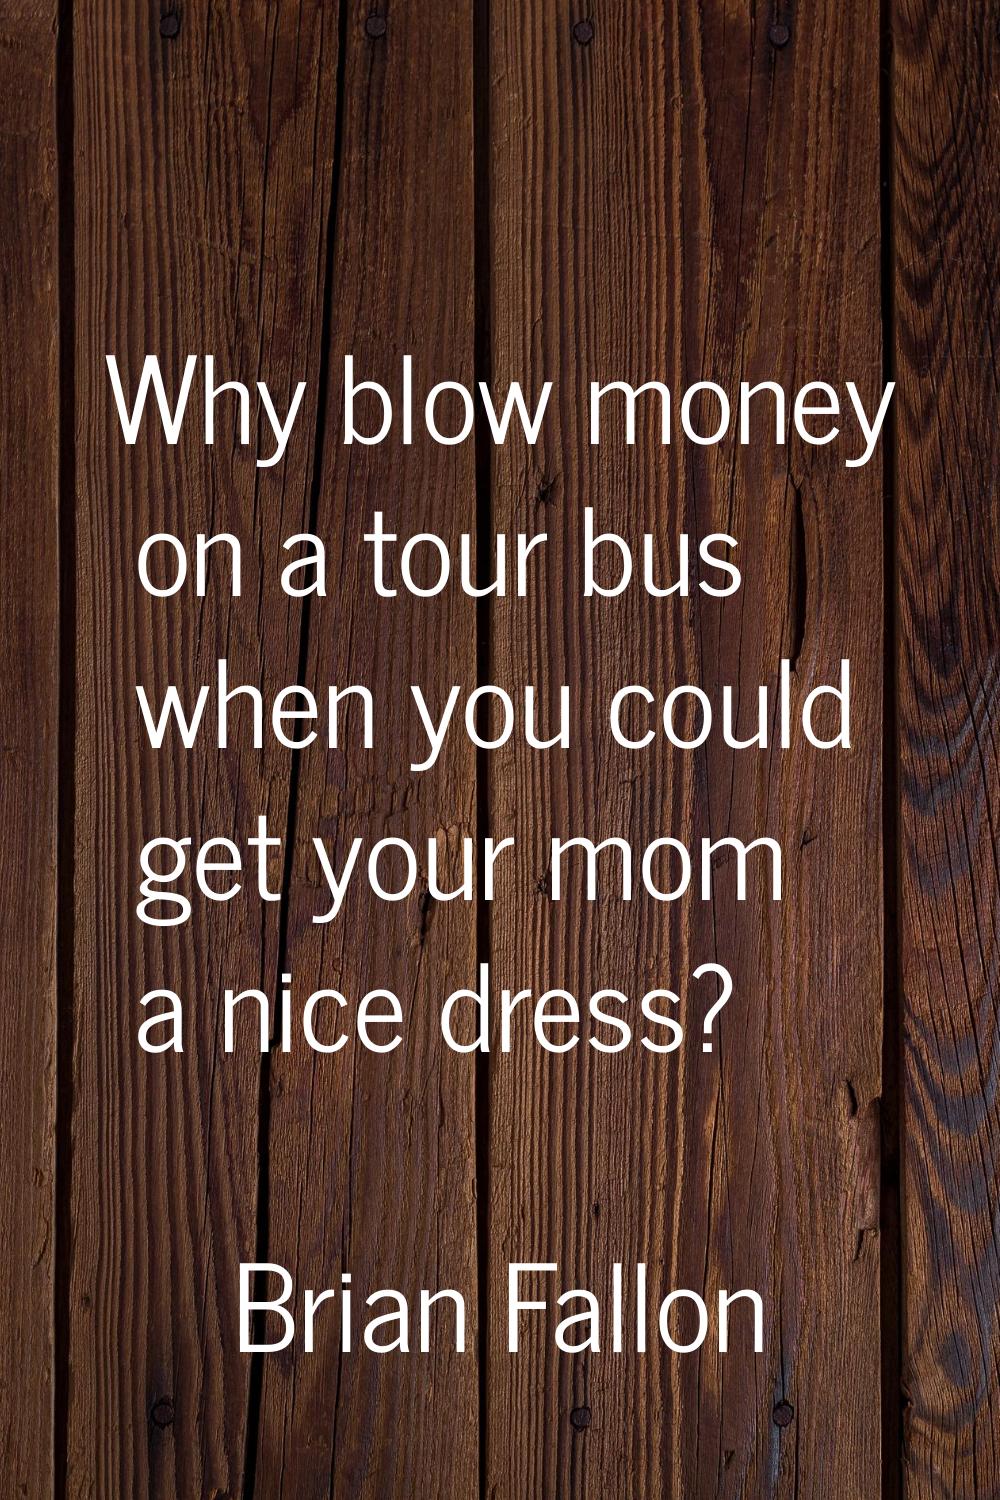 Why blow money on a tour bus when you could get your mom a nice dress?